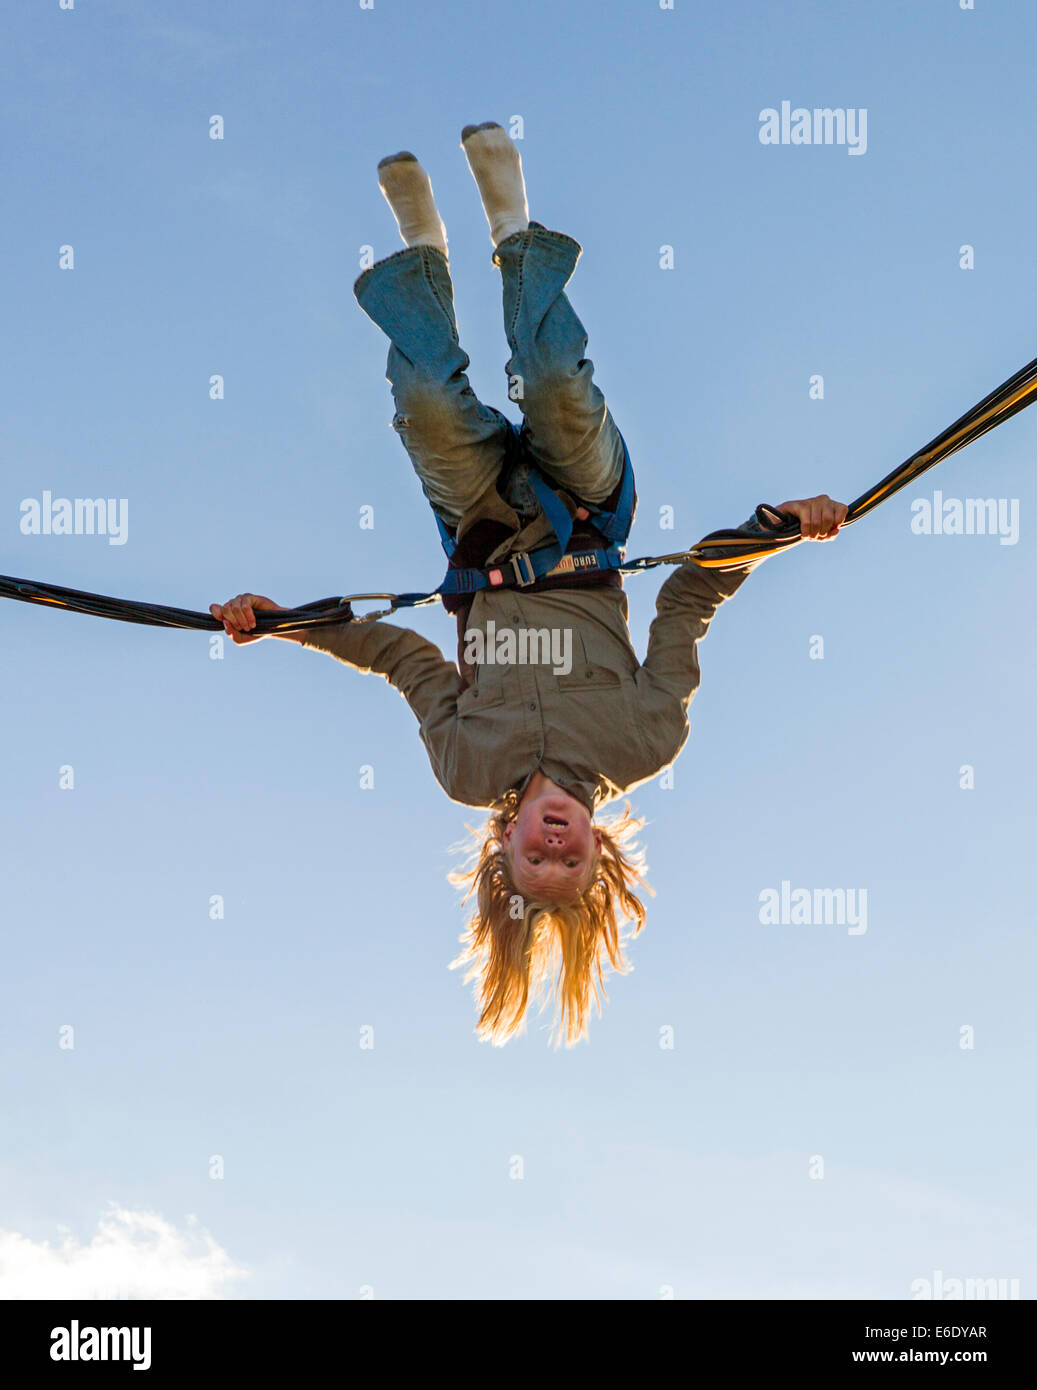 Children bounce on a Bungee Trampoline, Chaffee County Fair, Colorado, USA Stock Photo